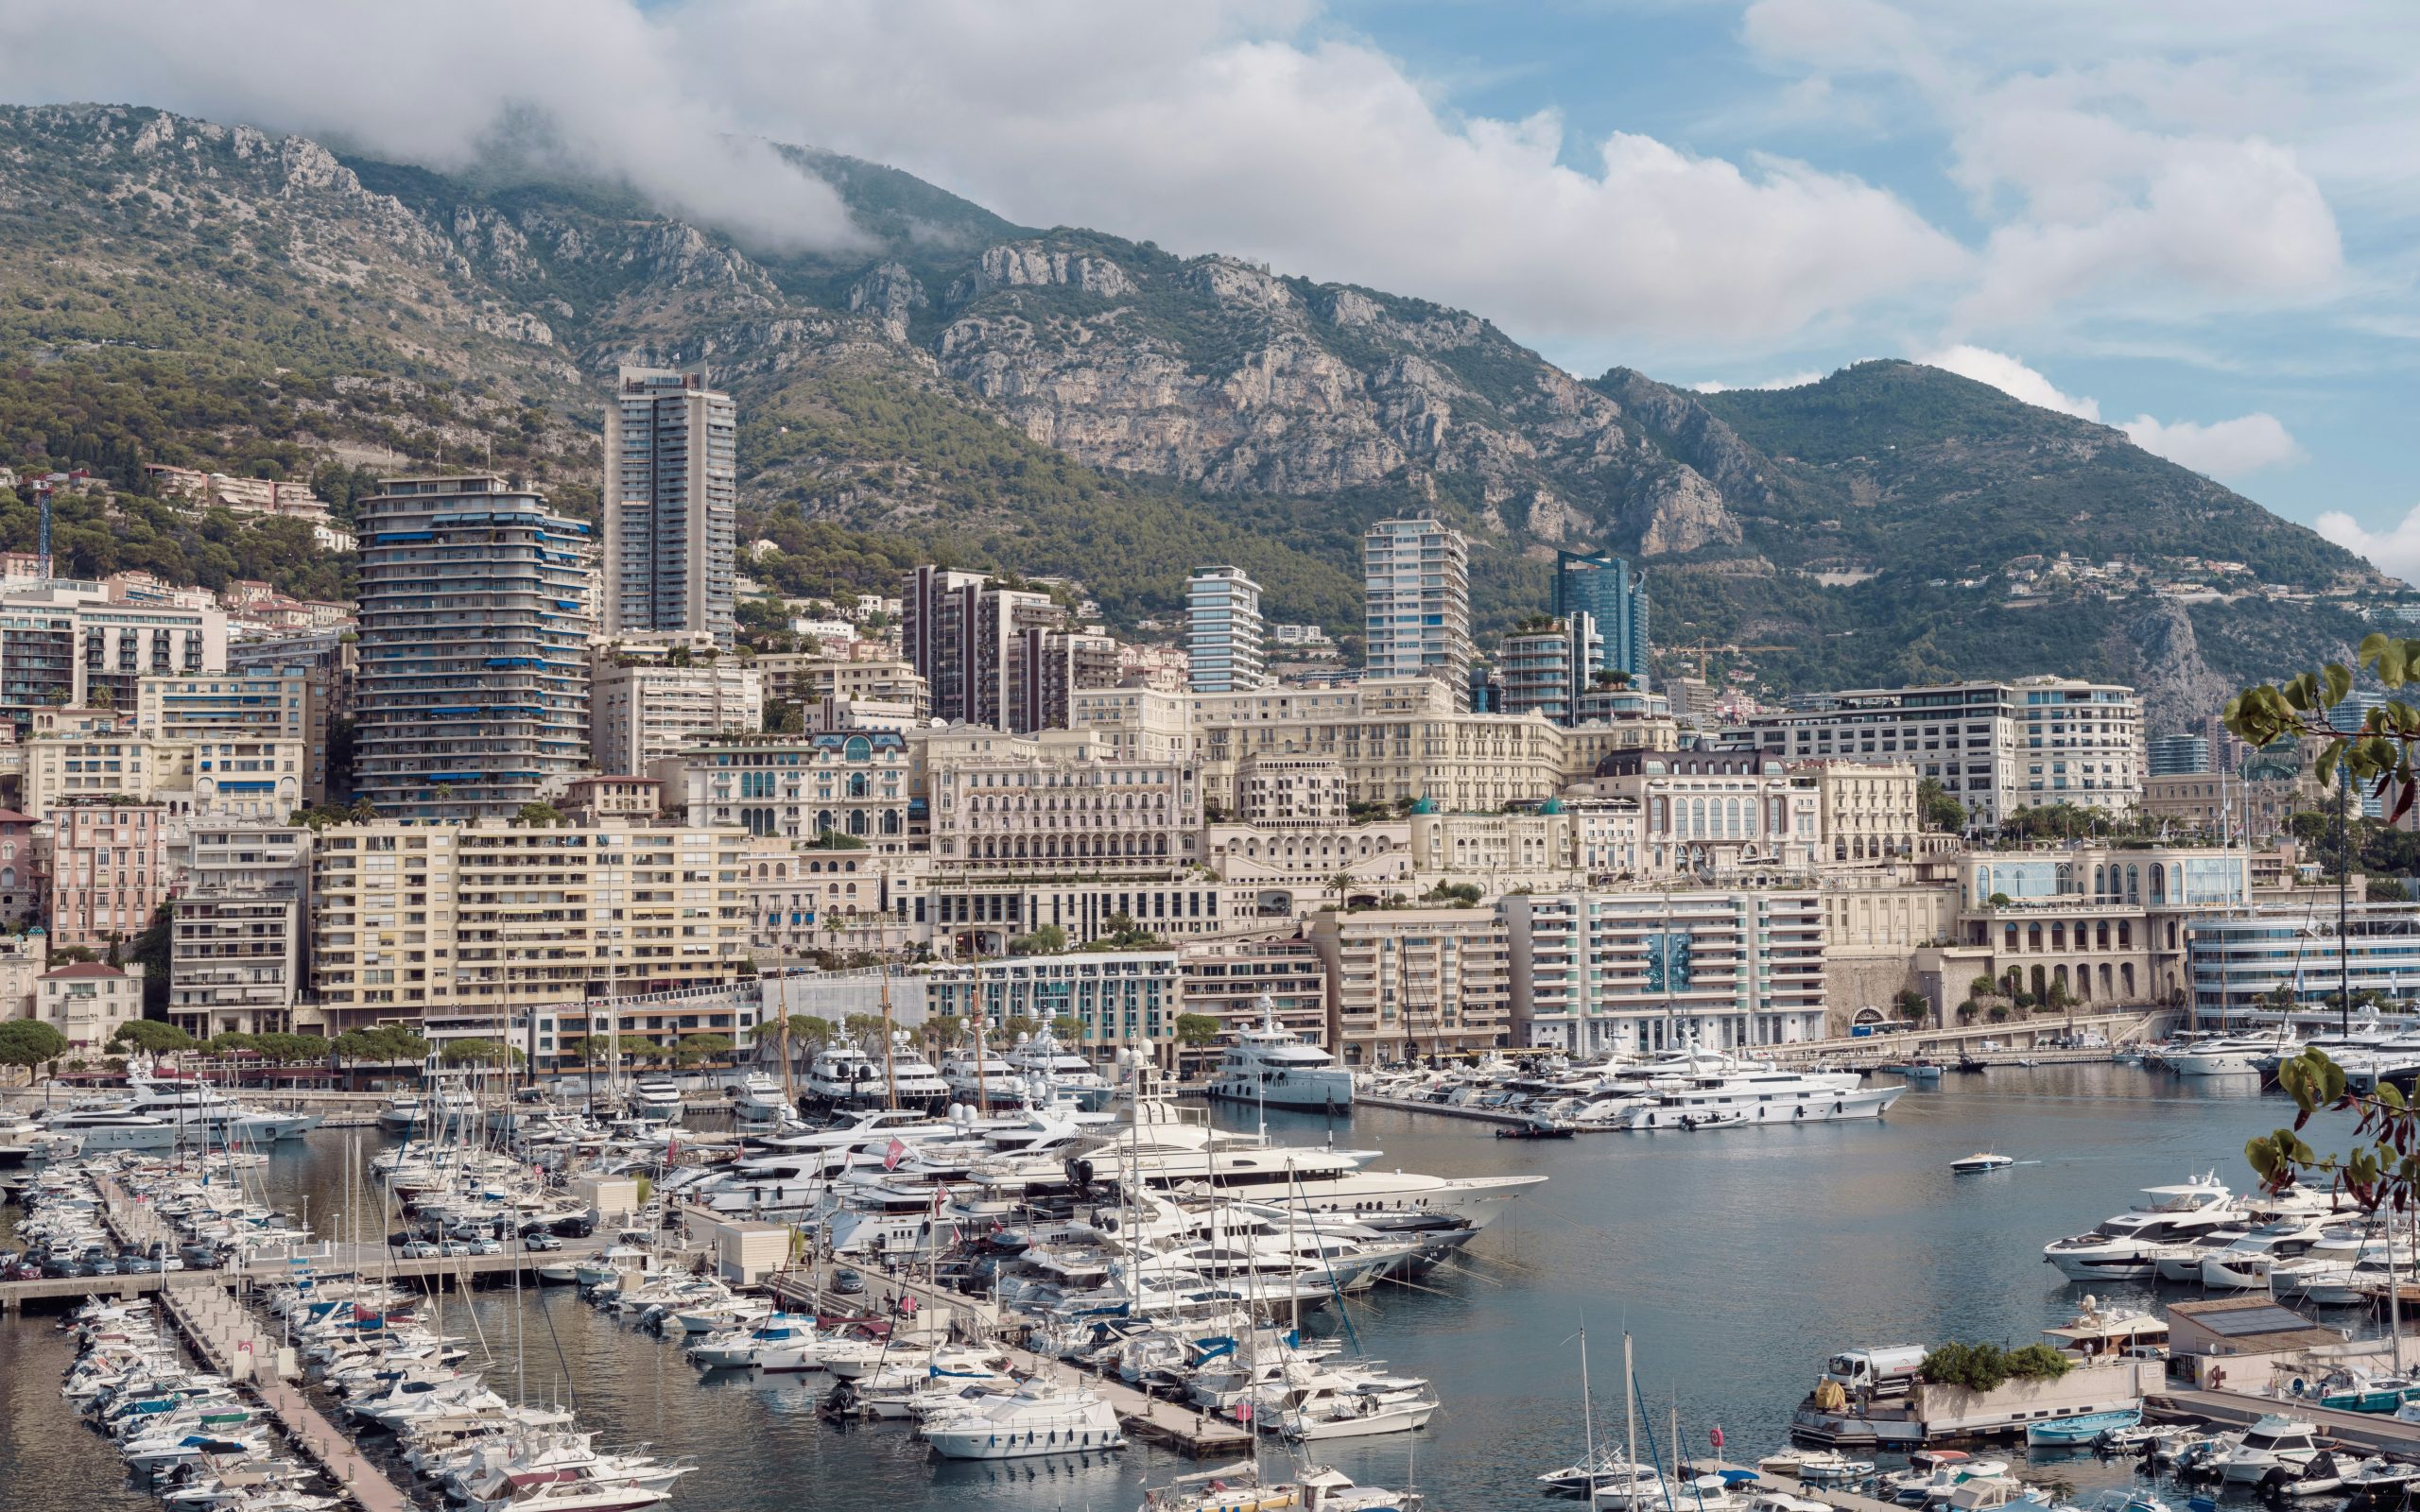 discover the allure of monaco with our travel guide featuring top attractions, hidden gems, and insider tips for an unforgettable experience.